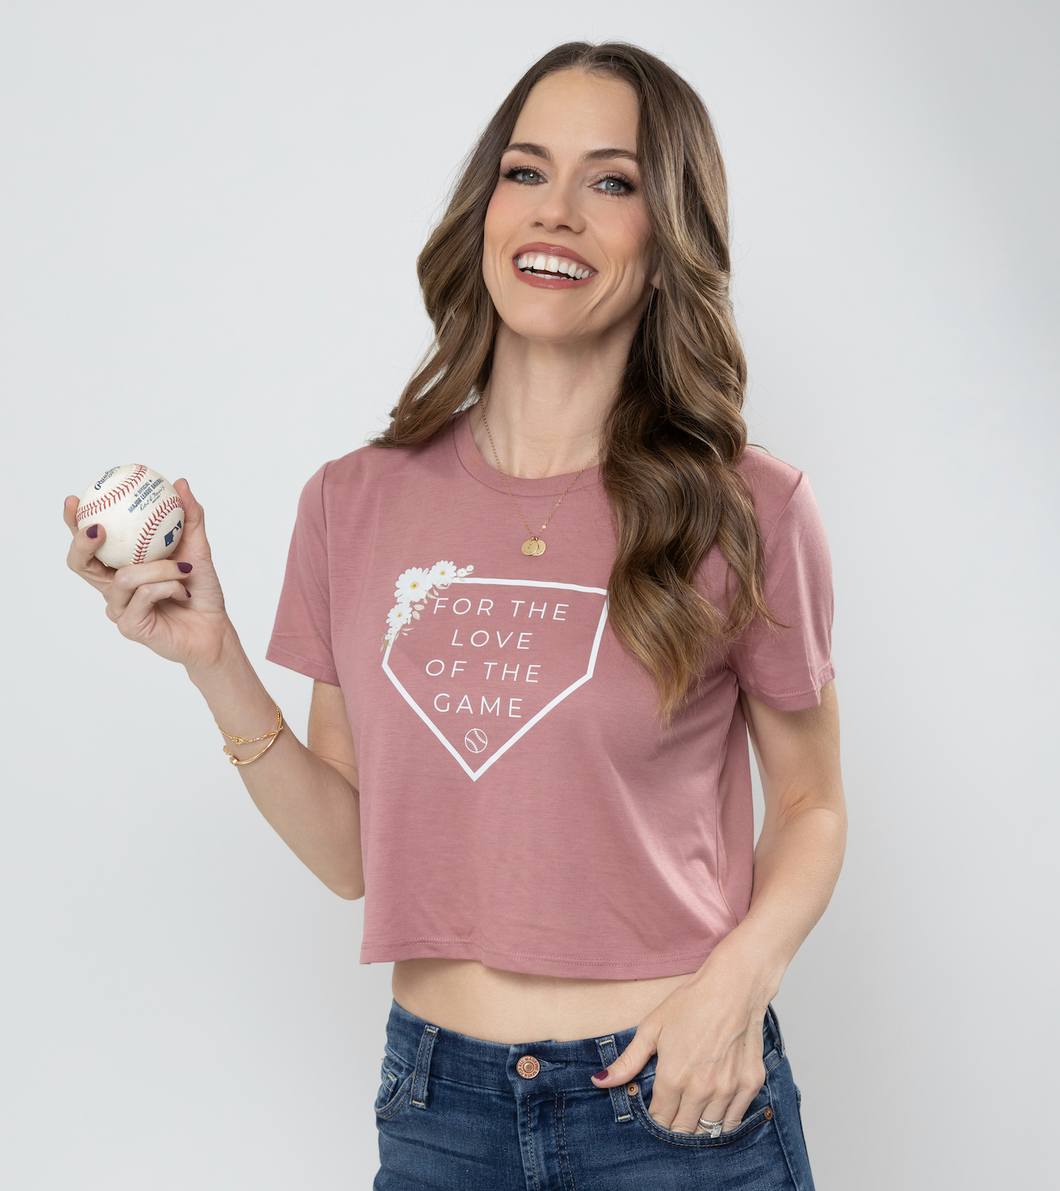 For the Love of the Game Baseball Softball Women's Cropped T-Shirt